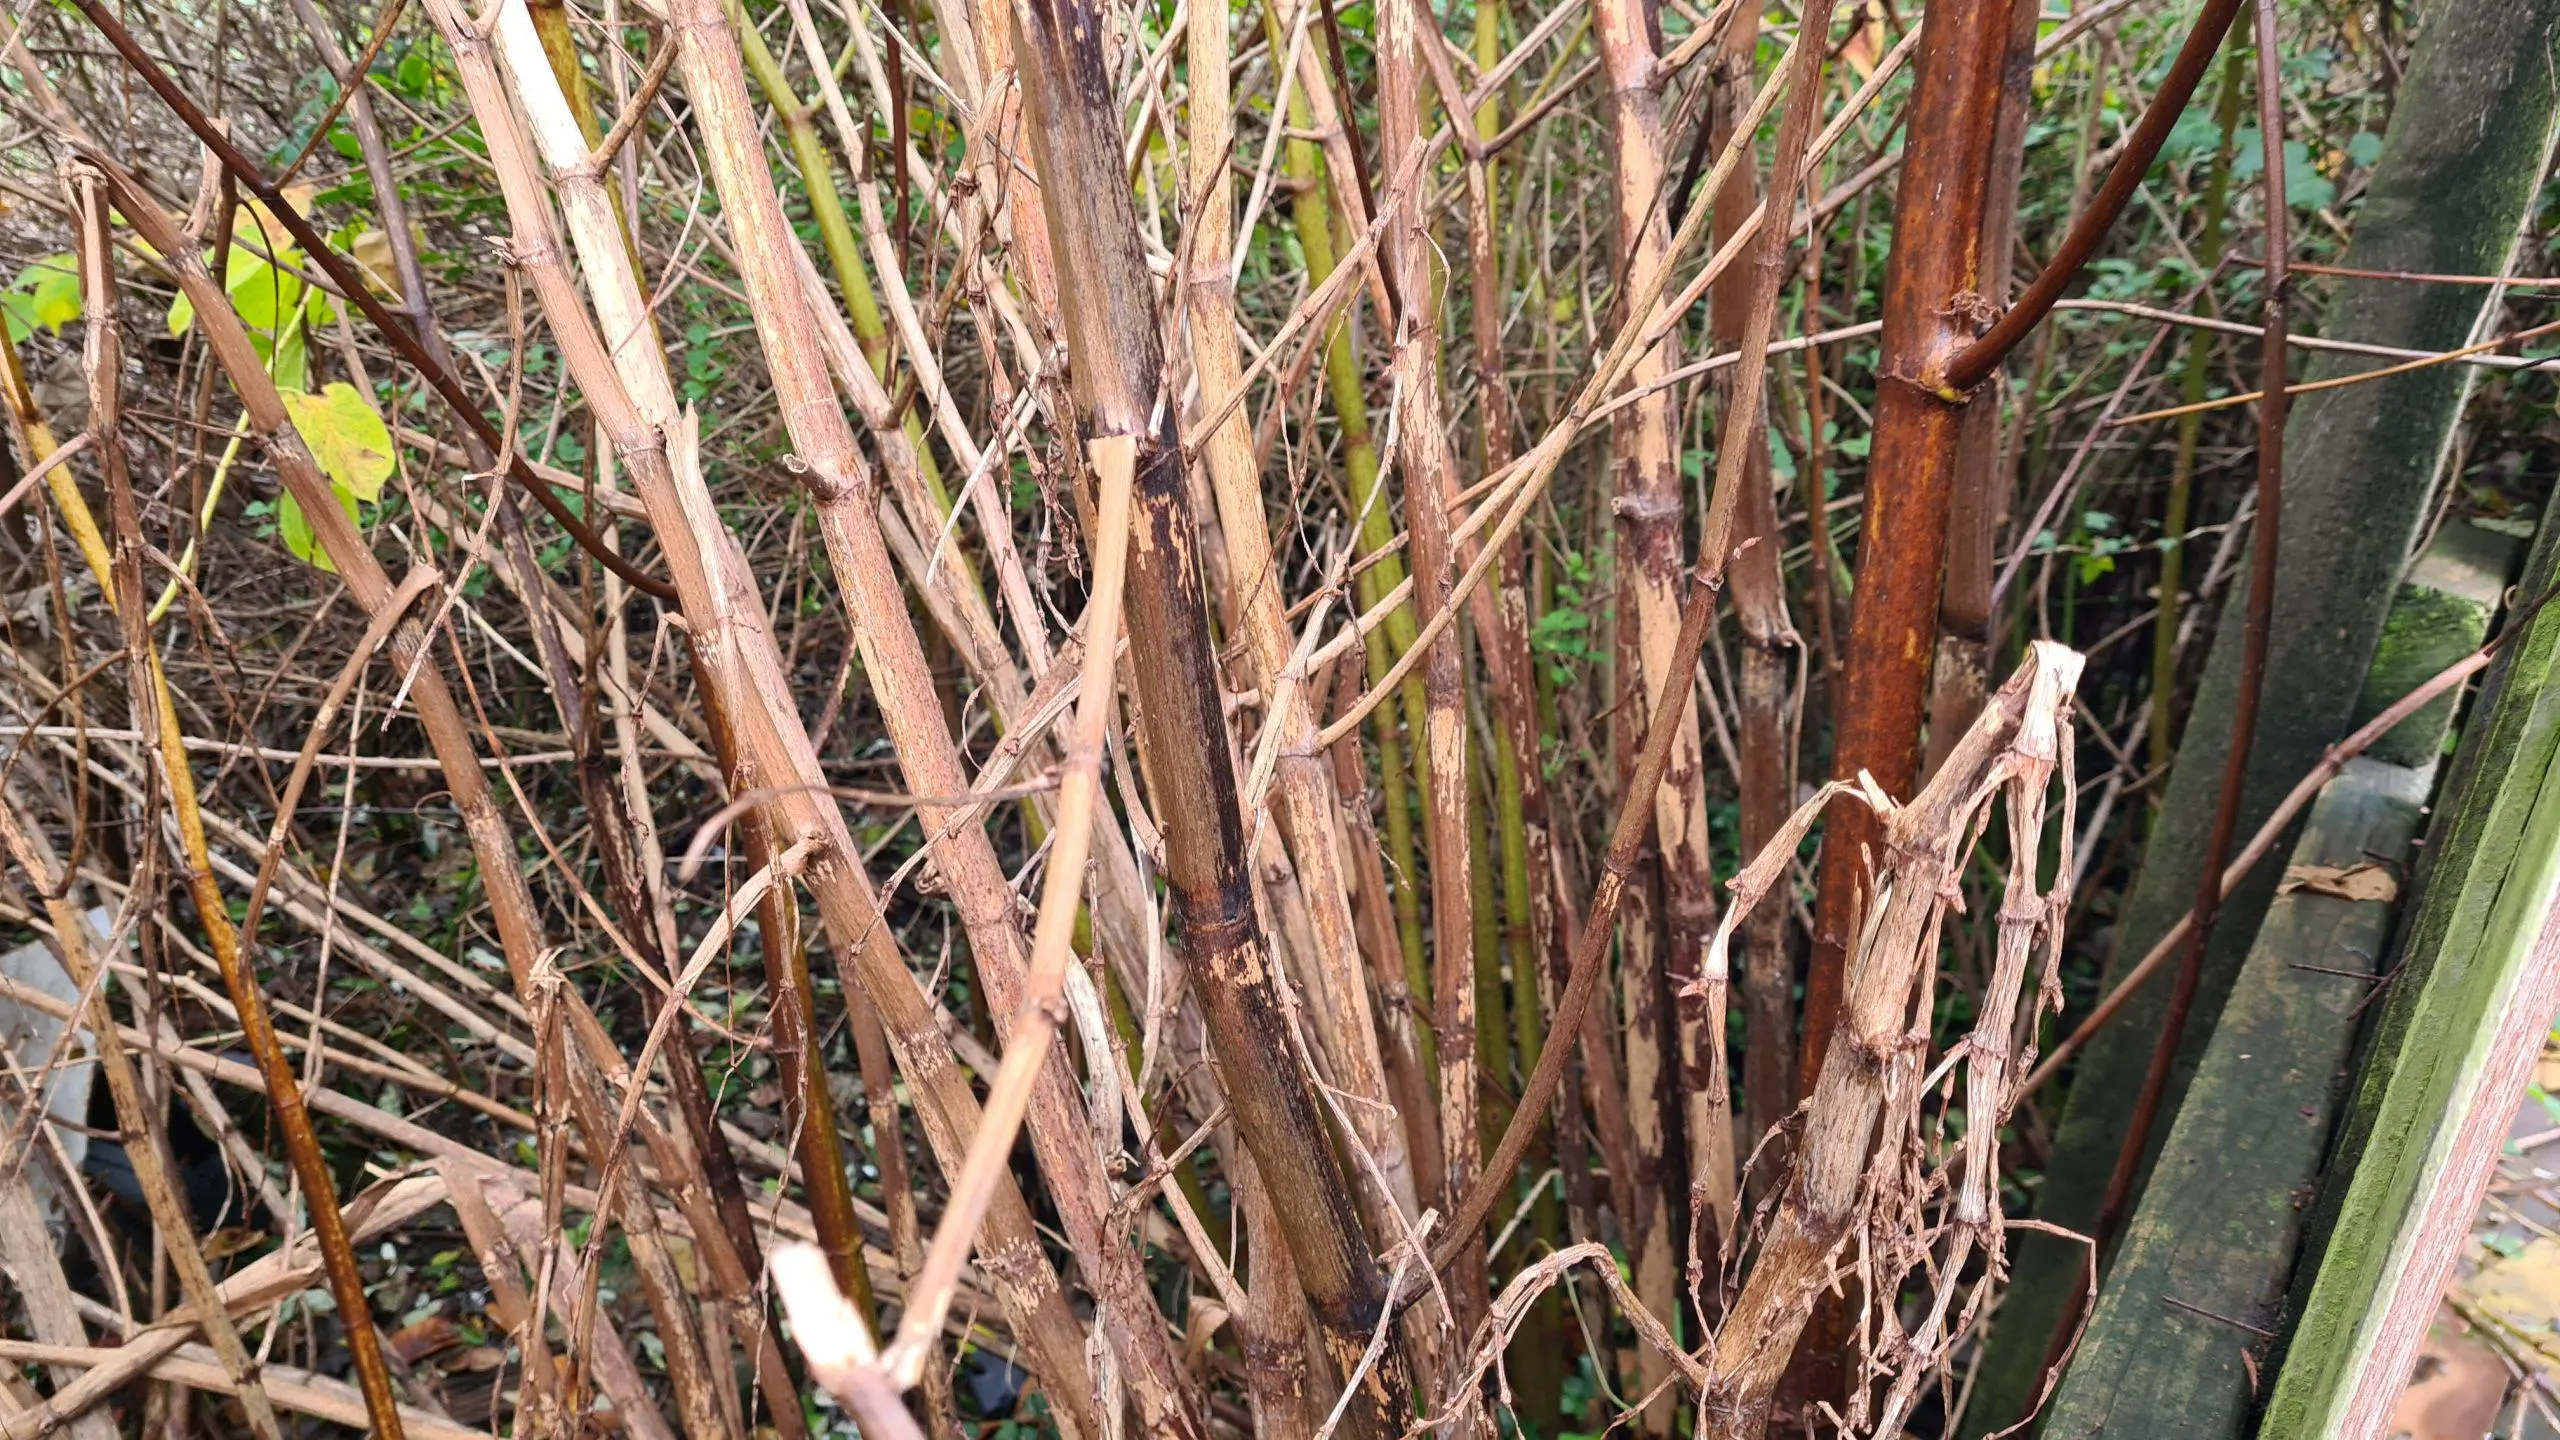 Brittle stems turned brown in late autumn scaled